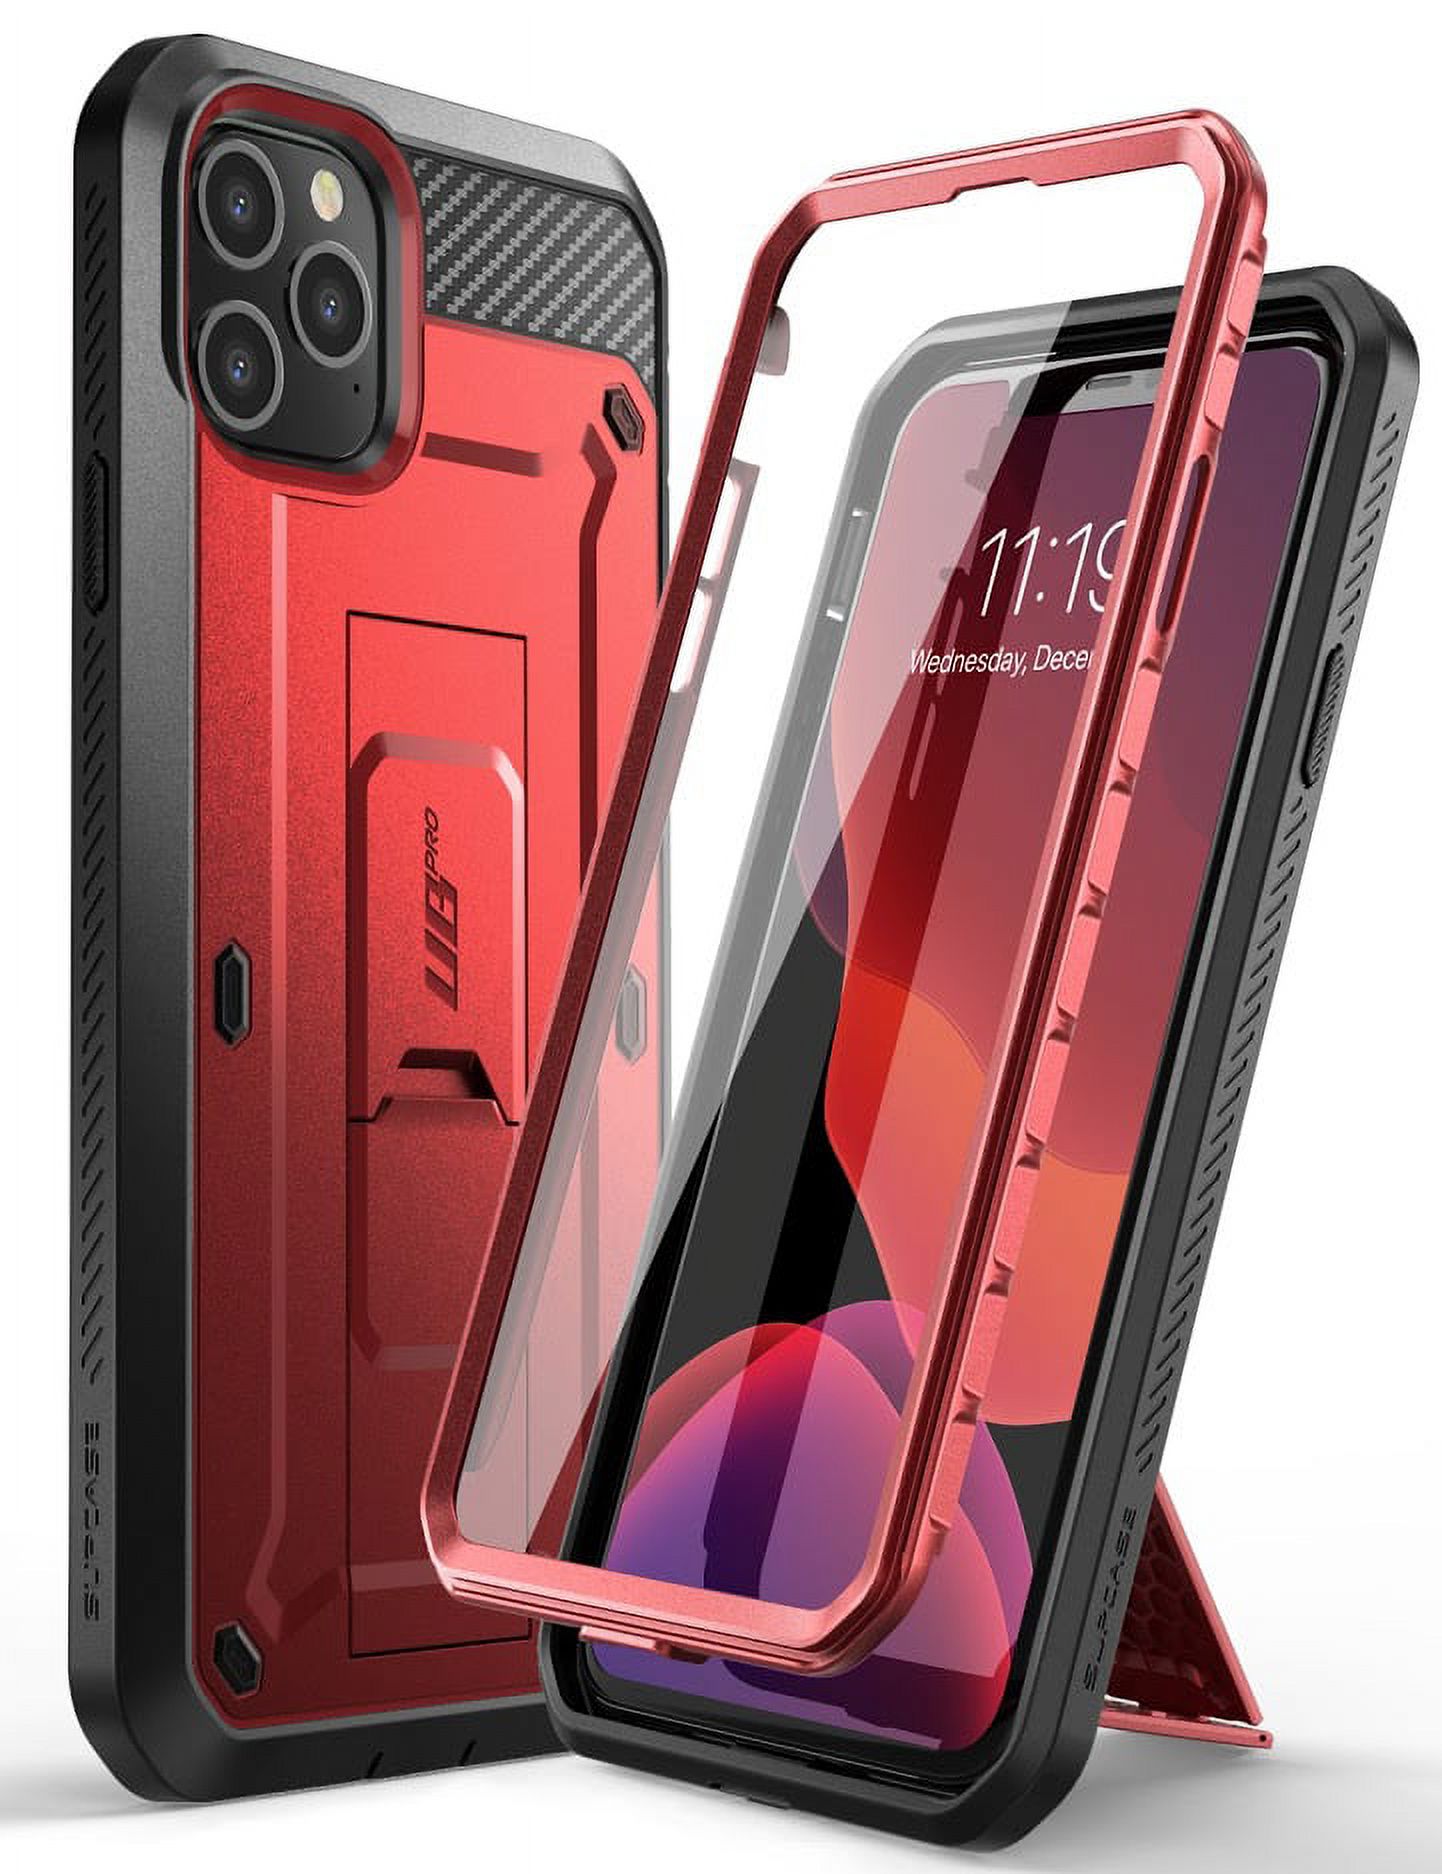 SUPCASE Unicorn Beetle Pro Series Case Designed for iPhone 11 Pro 5.8 Inch (2019 Release), Built-in Screen Protector Full-Body Rugged Holster Case (MetallicRed) - image 1 of 8